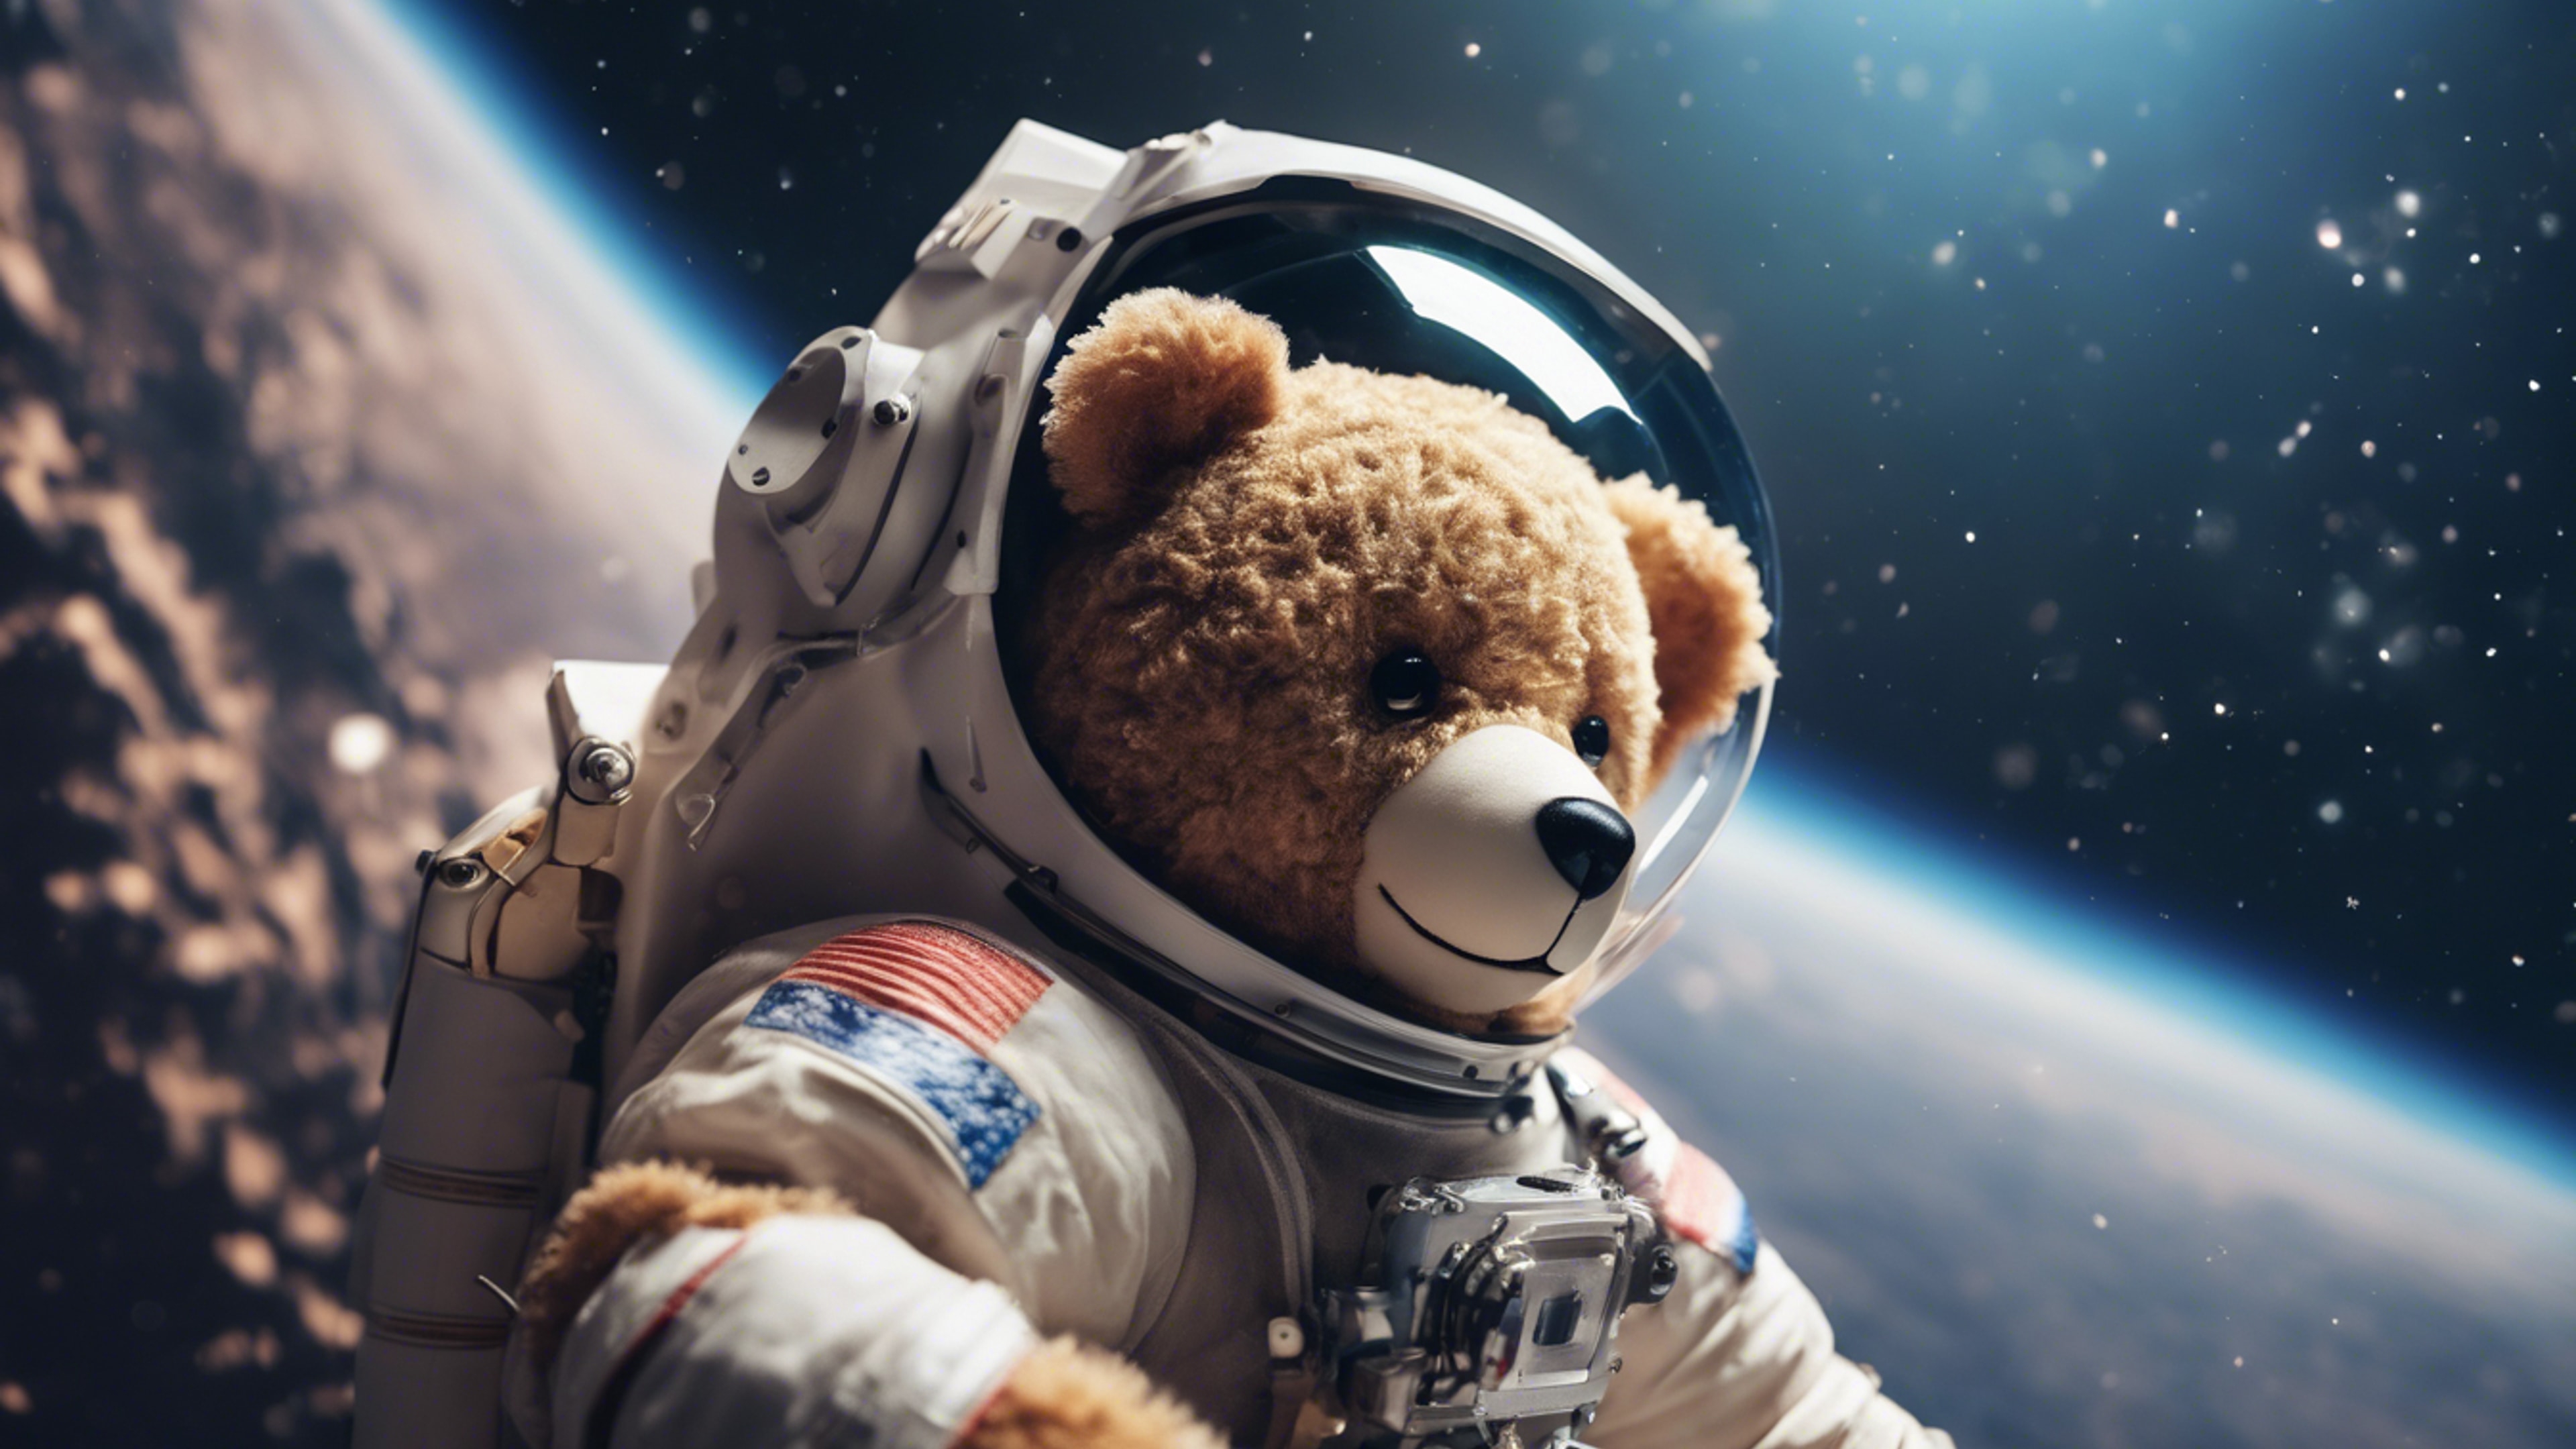 A teddy bear astronaut floating in space. Tapet[264e253f630141468c44]